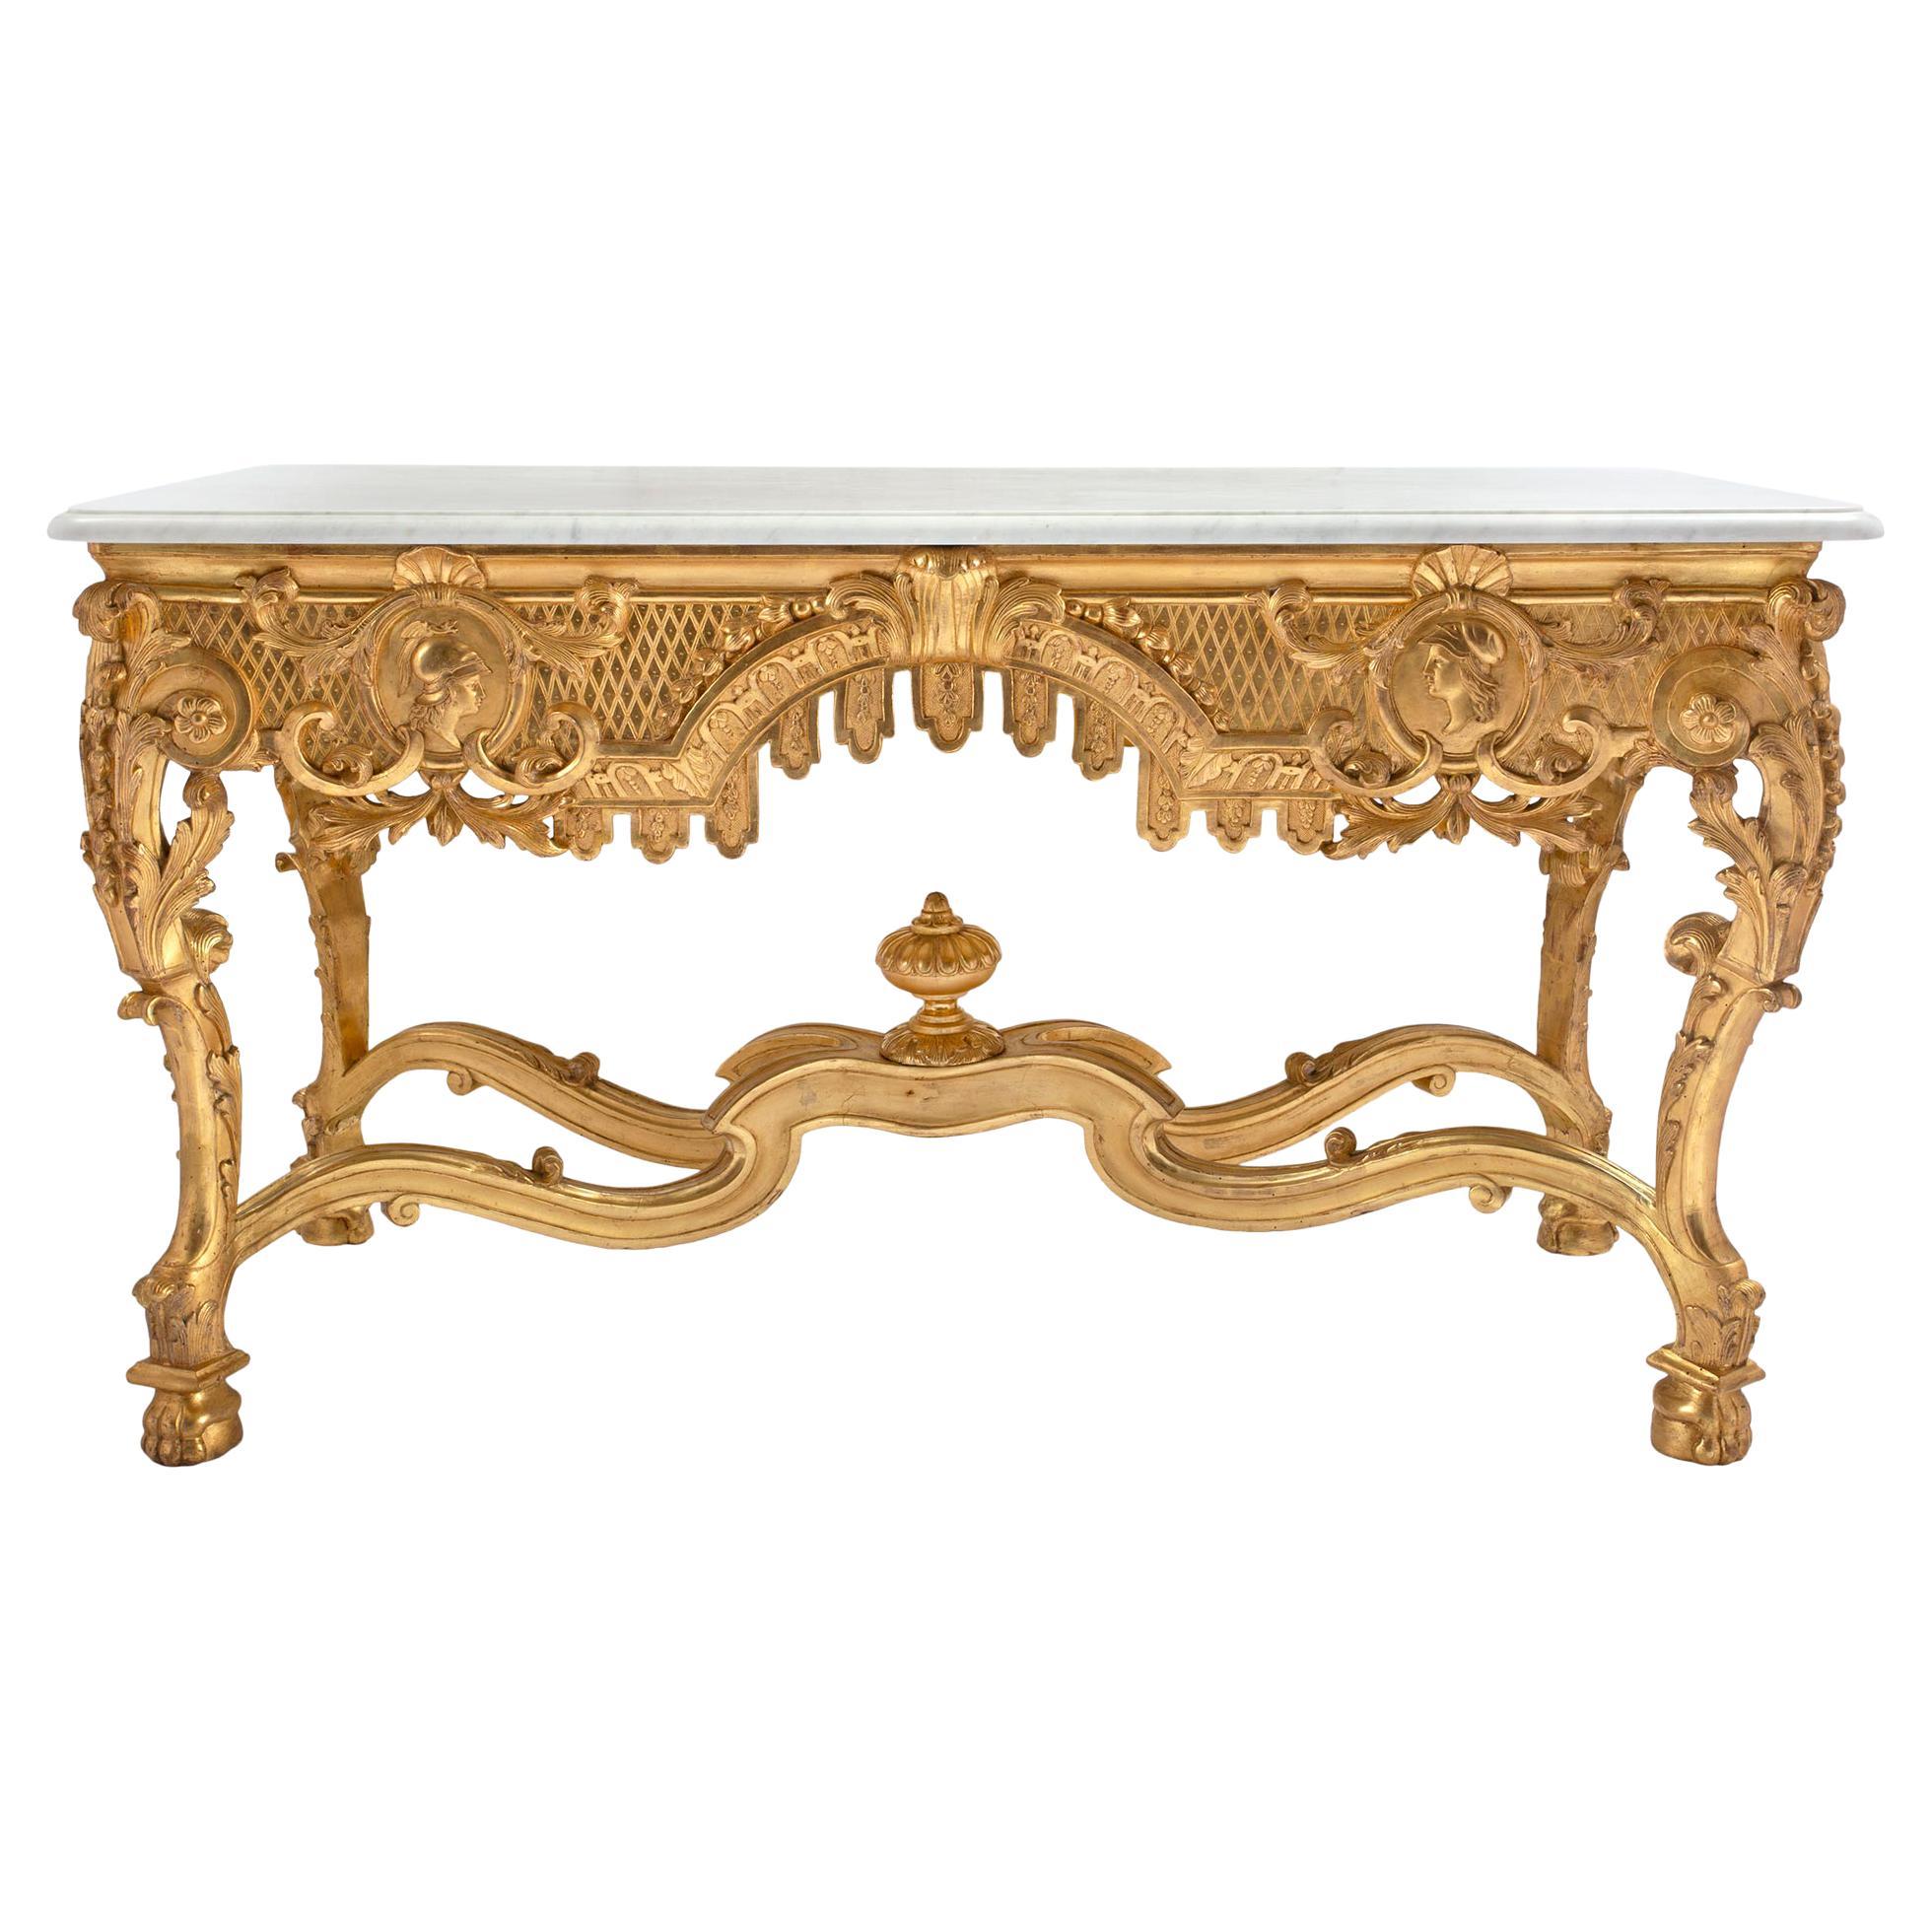 French 19th Century Regency Style Giltwood and Carrara Marble Centre Table For Sale